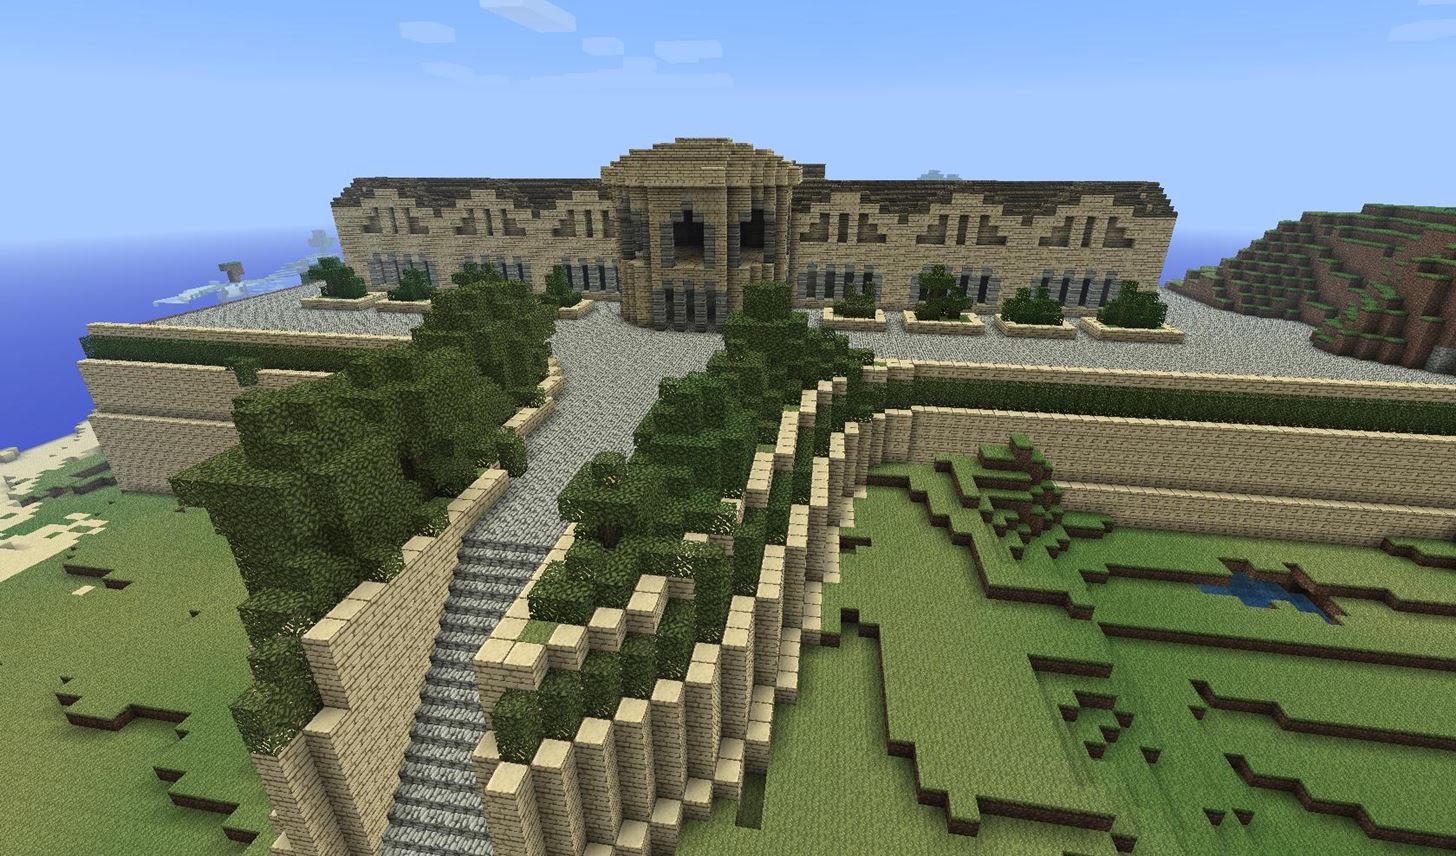 Minecraft World's Weekly Server Challenge: Buildings Throughout Time #2